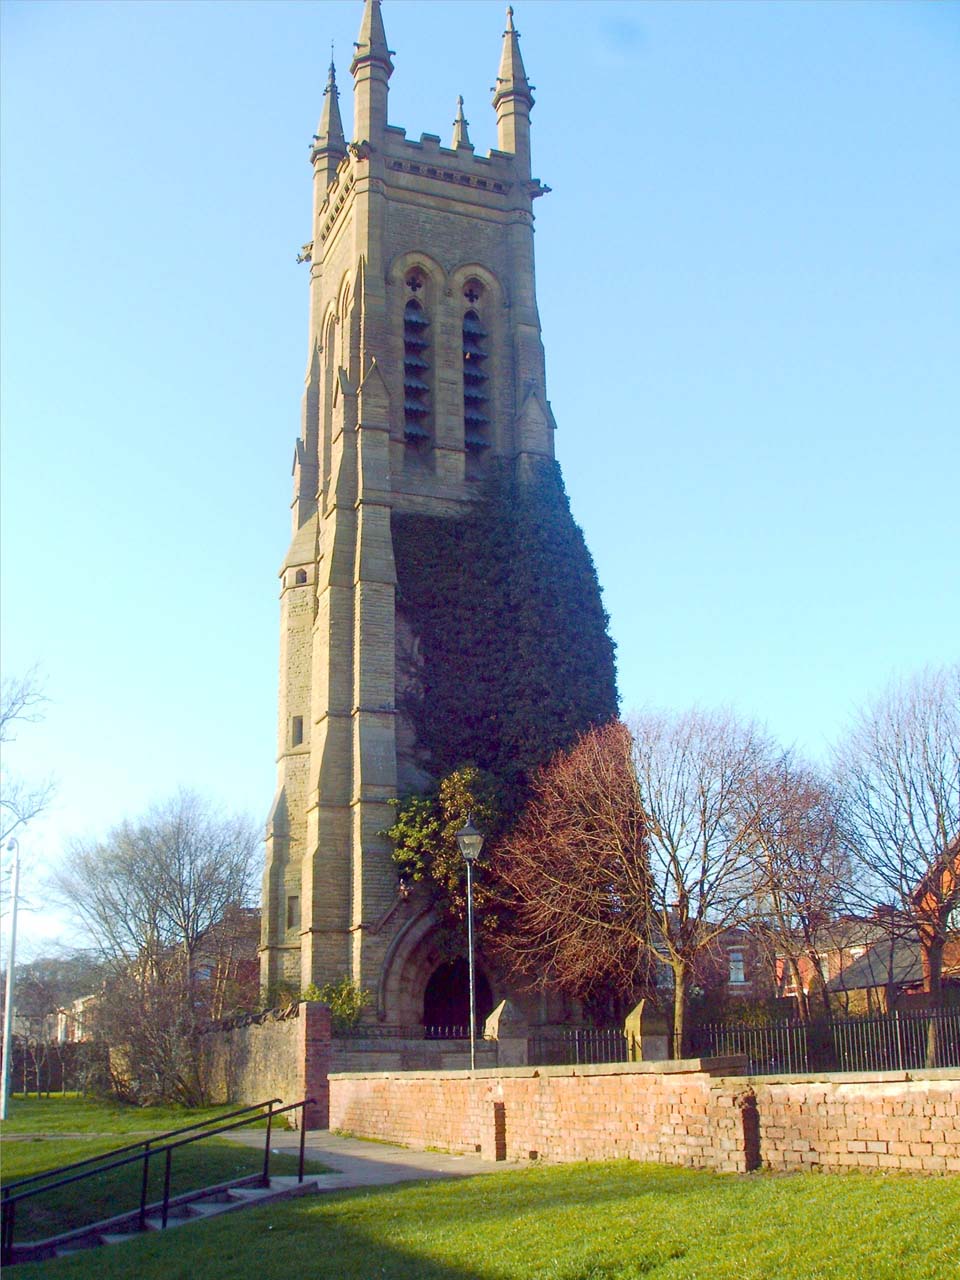 The tower of St Philip's Church